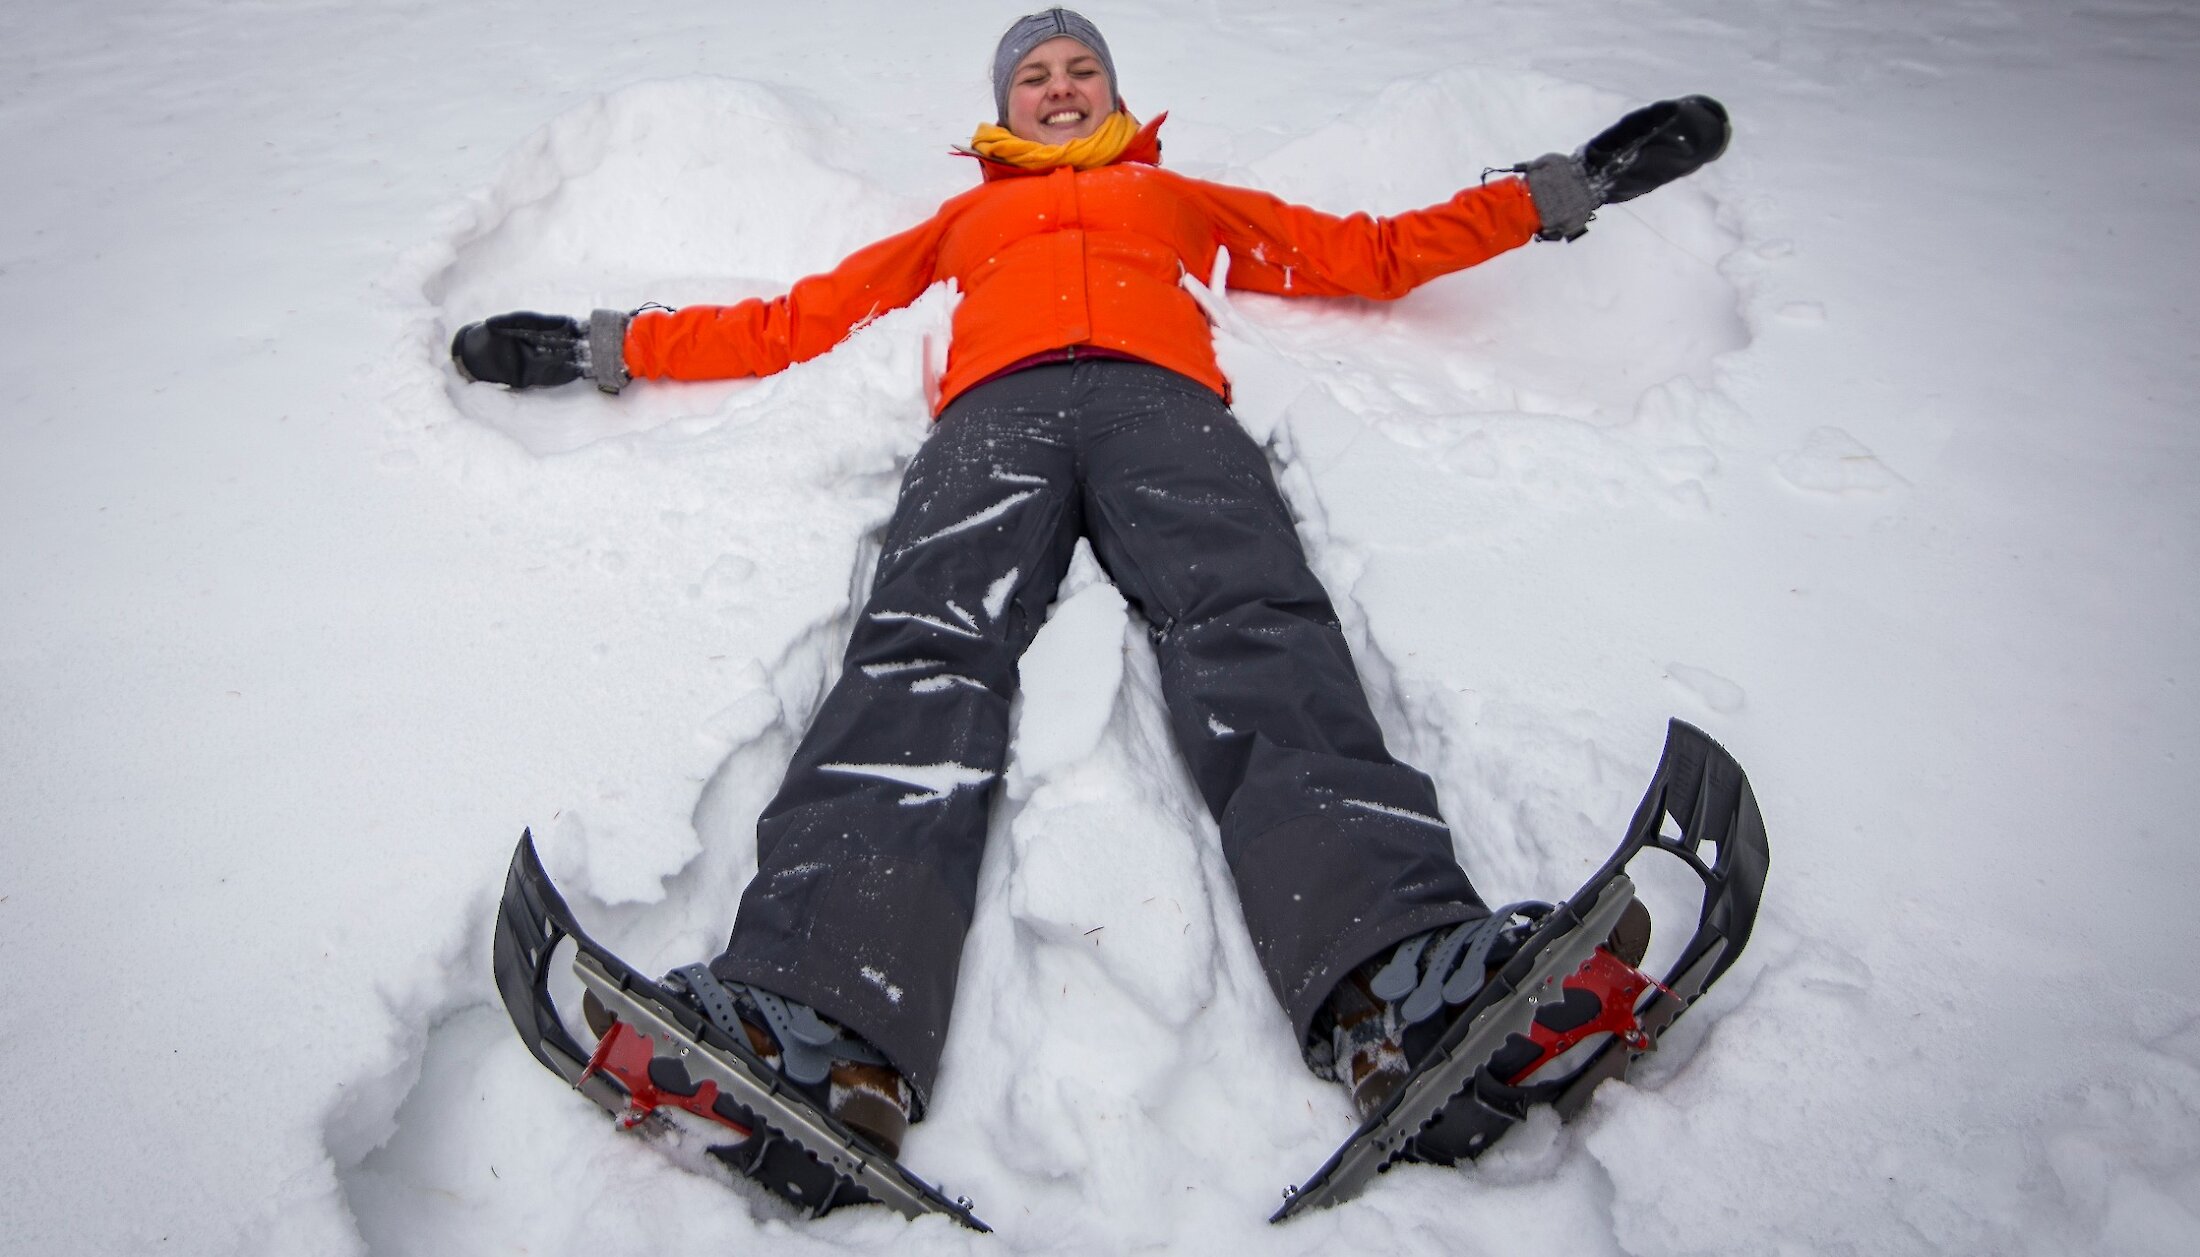 Making an snow angel in deep snow wearing snowshoes